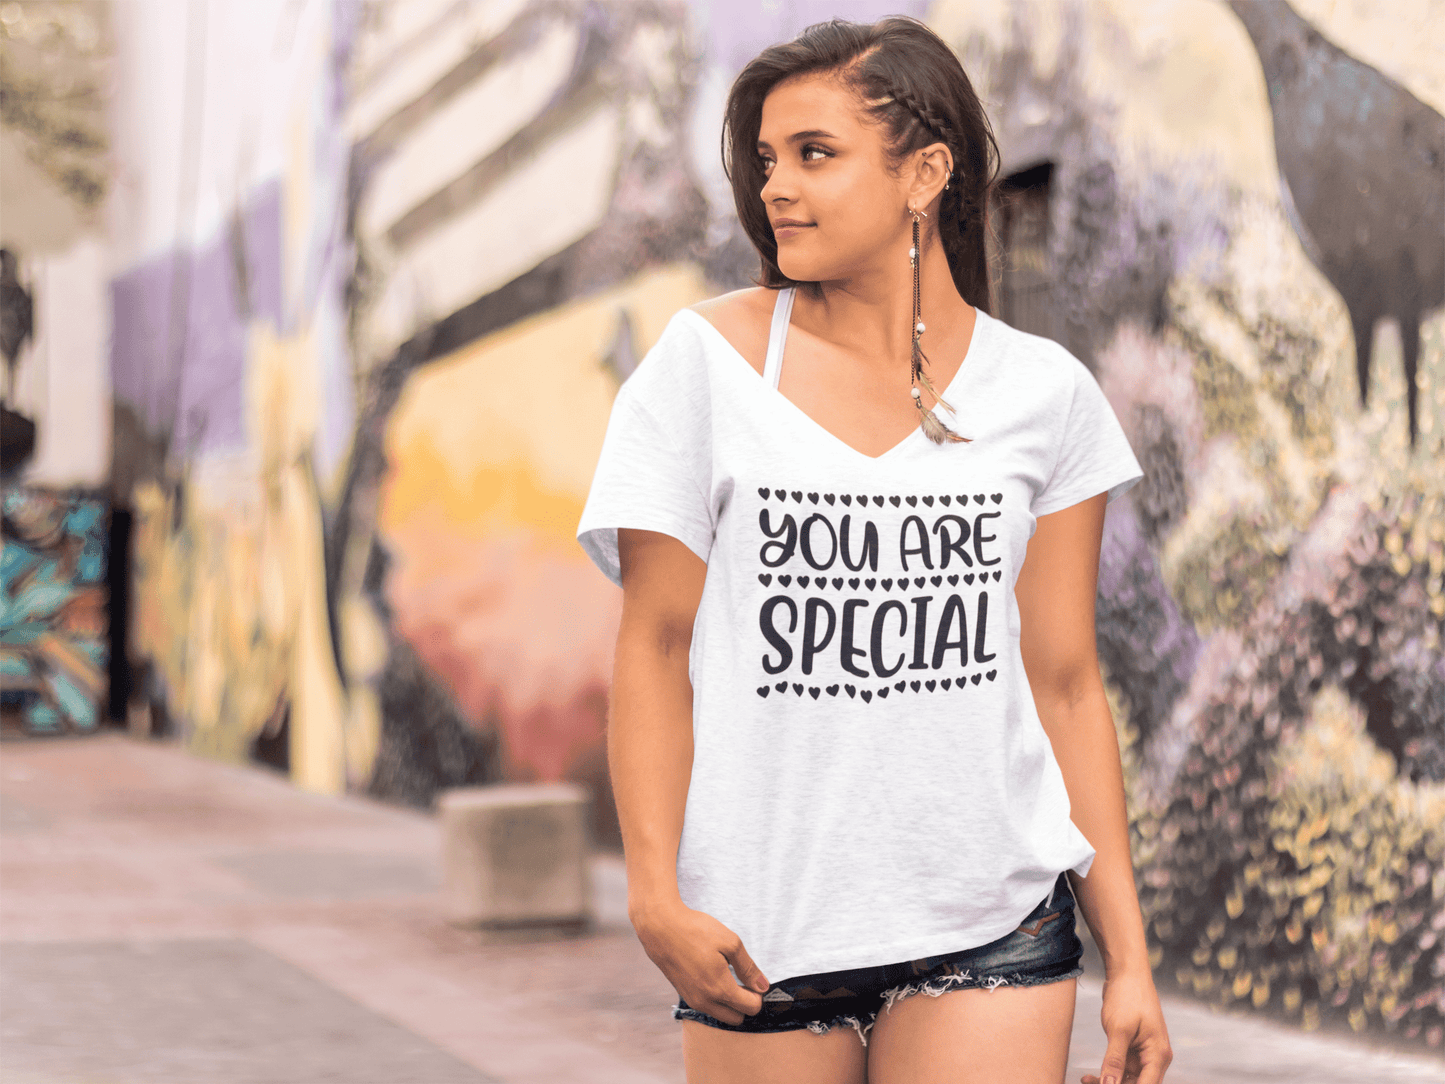 ULTRABASIC Women's T-Shirt You Are Special - Hearts Short Sleeve Tee Shirt Tops